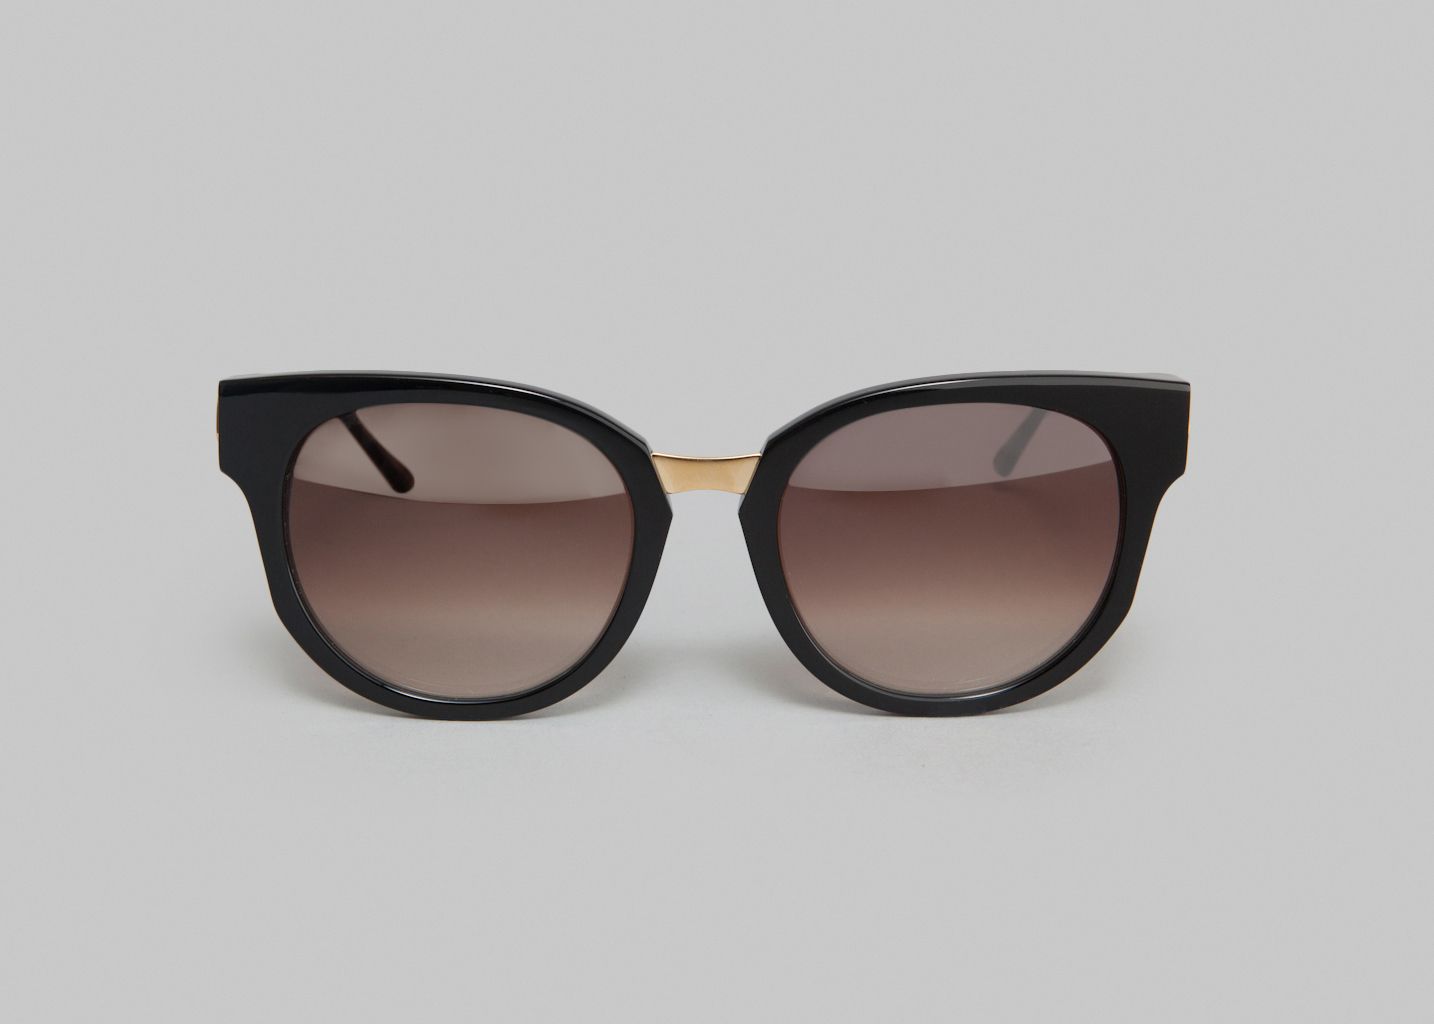 Lunettes Snobby - Thierry Lasry